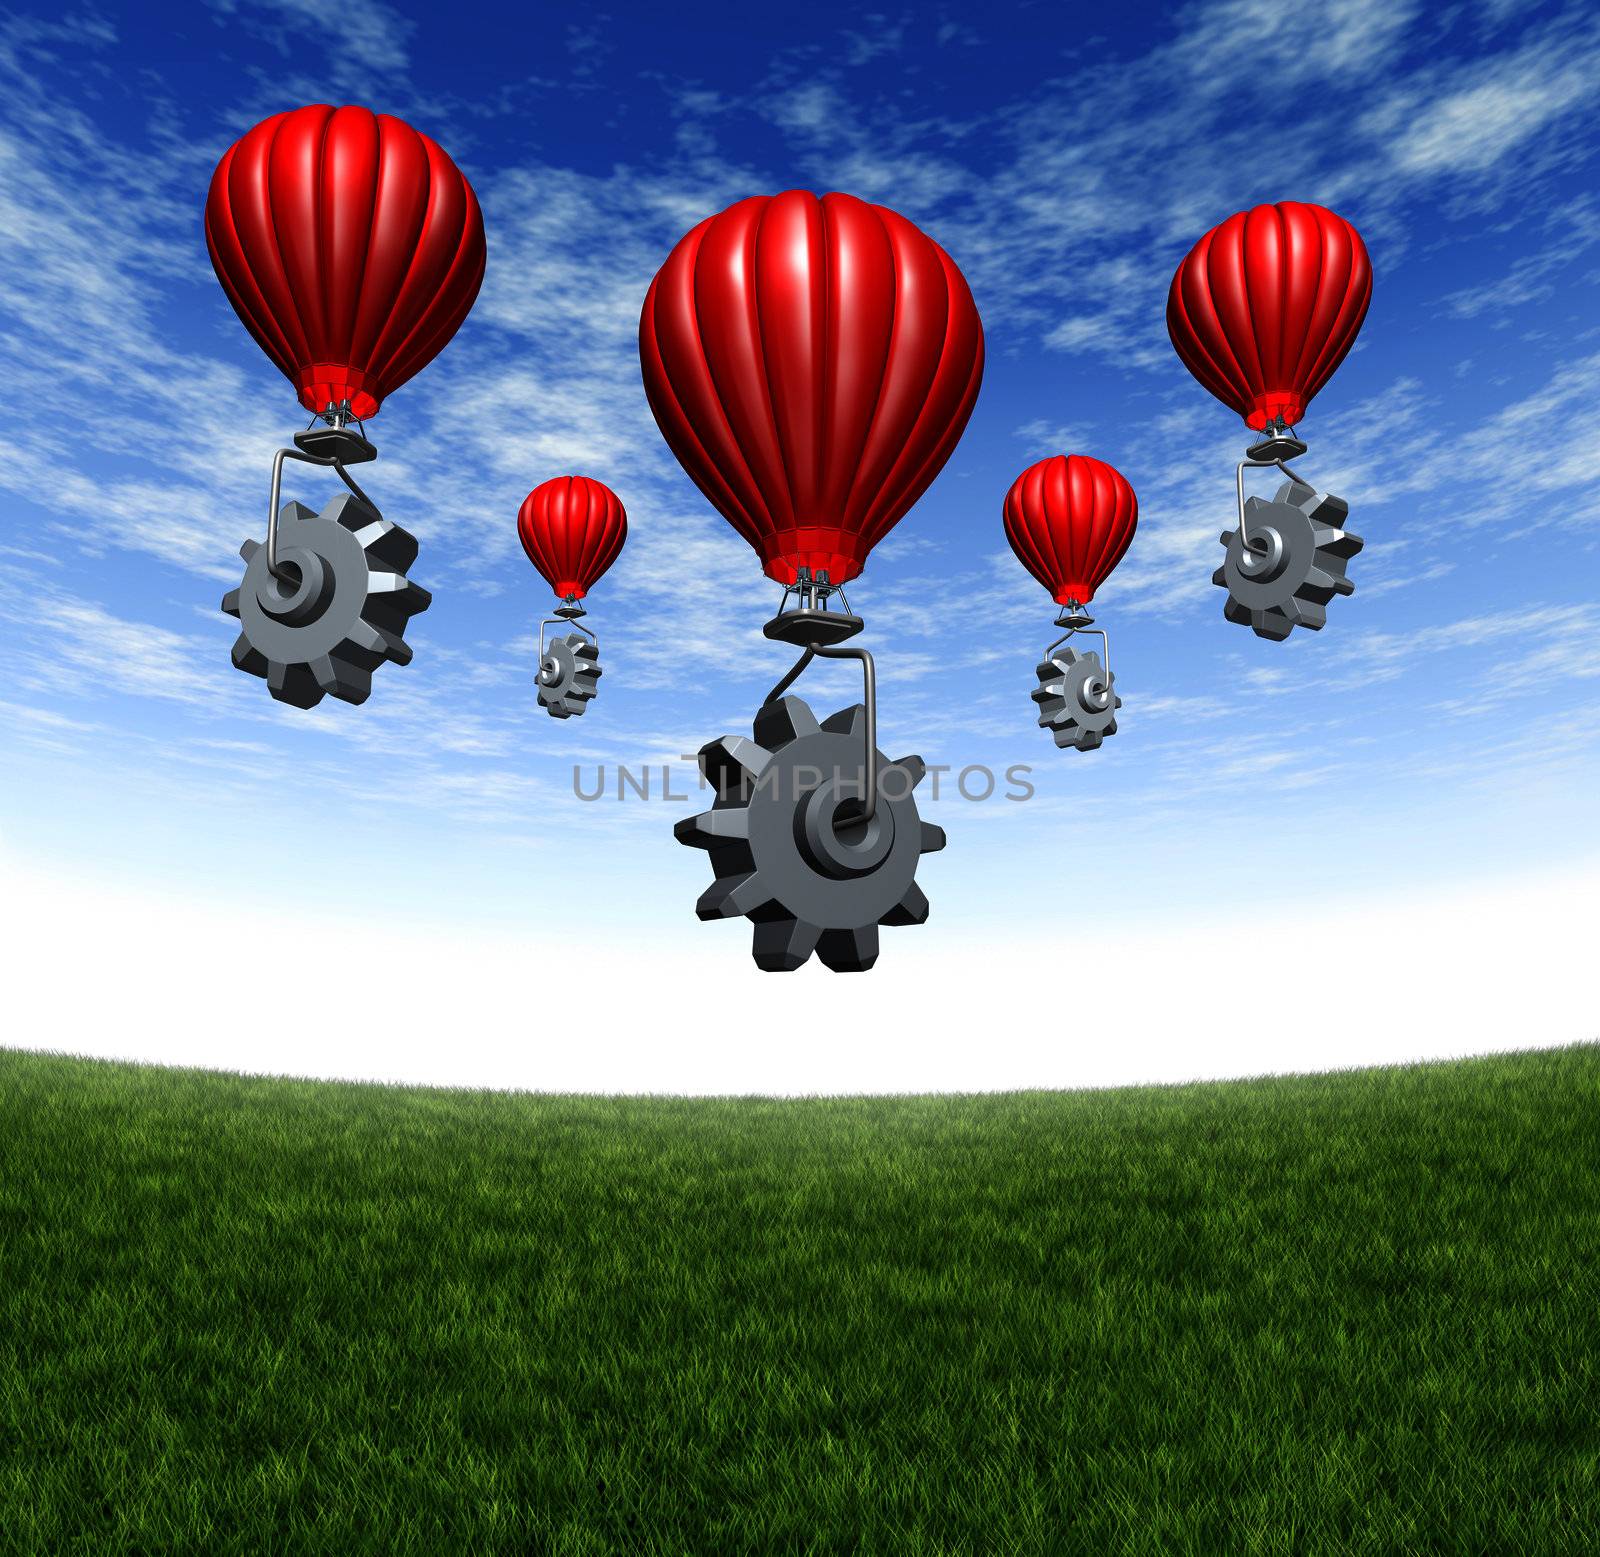 Internet cloud network with red hot air balloons lifting gears and cogs up to the sky as a mobility technology concept of virtual data and assembling a mobile industry partnership on a summer sky with grass.